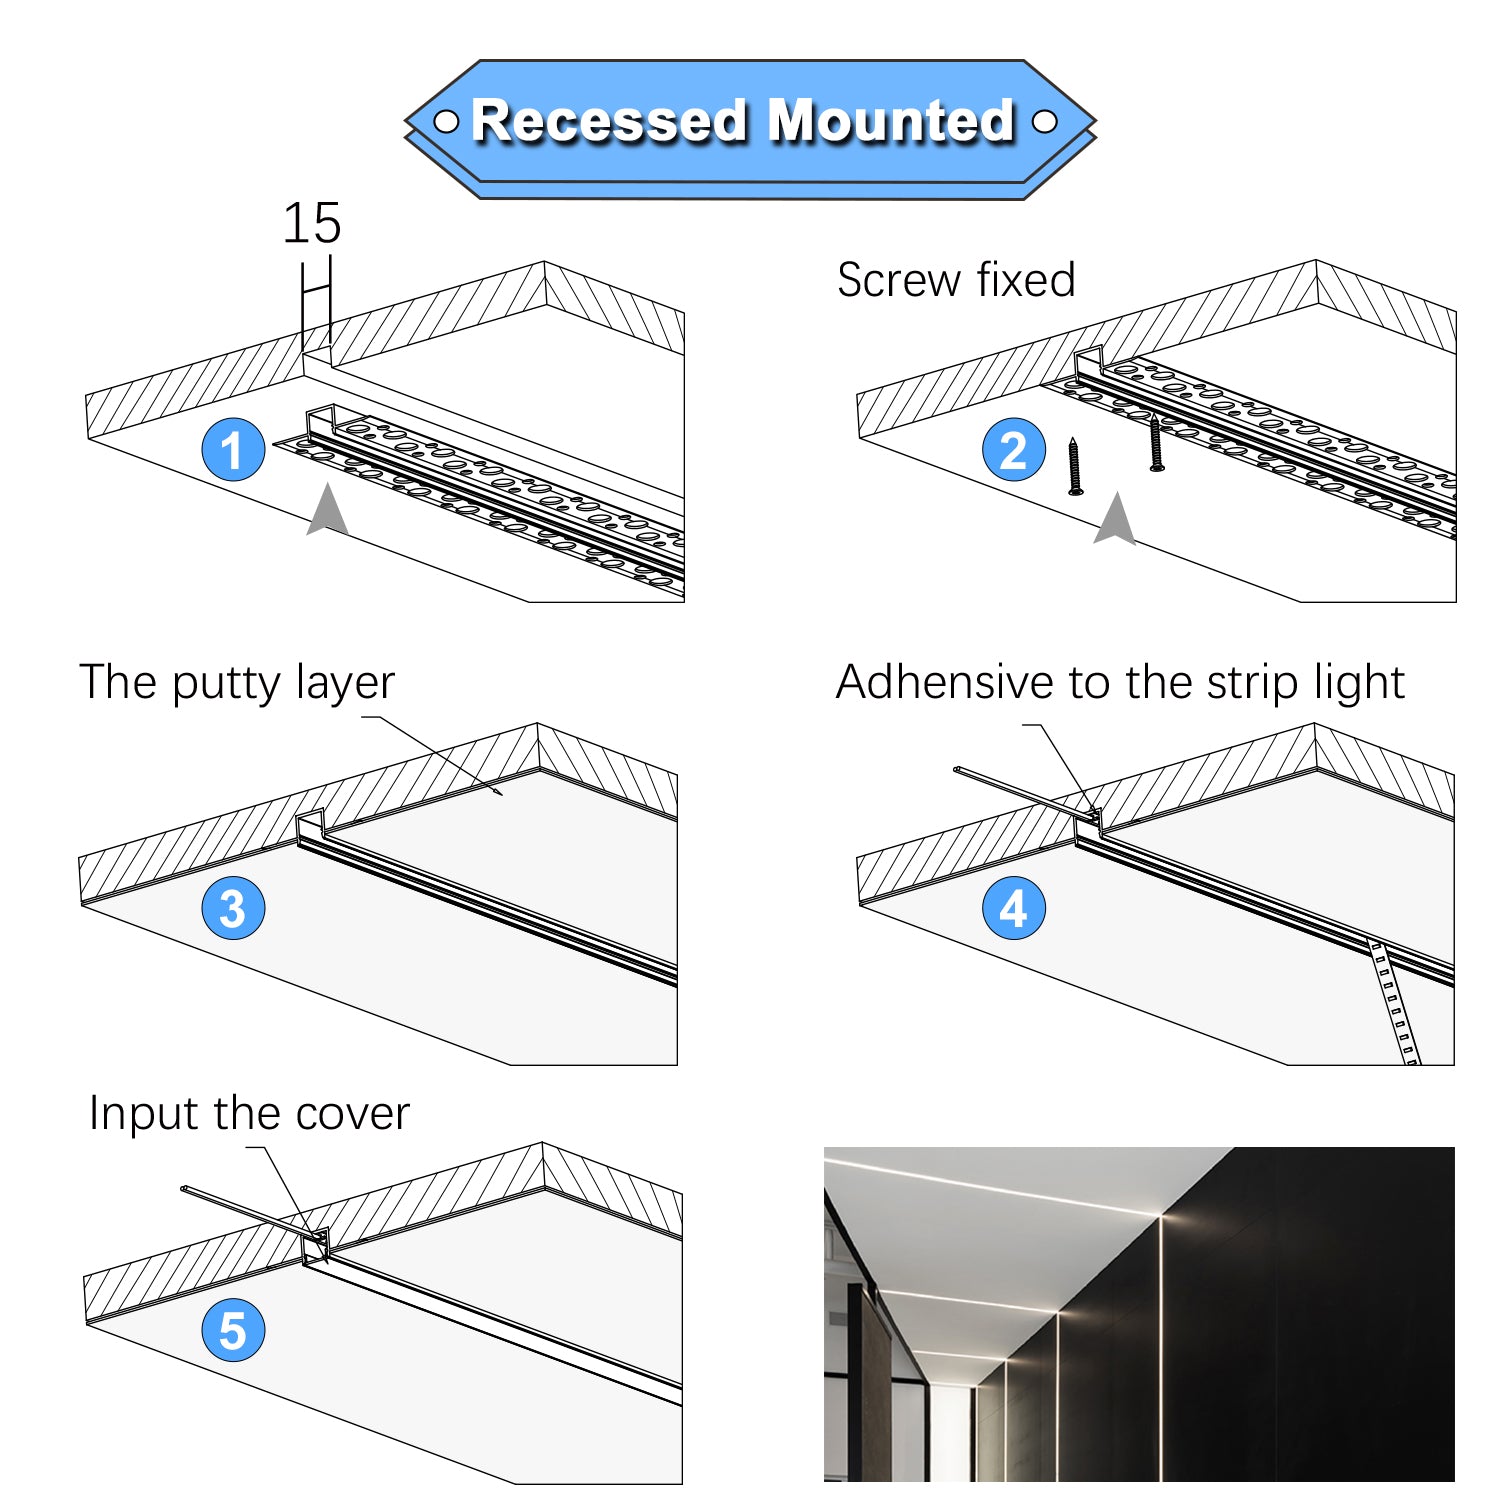 Send an inquiry for Morden Linear LED Light AL6063 Alloy Surface LED Diffuser Channel to high quality Moder Linear LED Light supplier. Wholesale LED Diffuser Channel directly from China Linear LED Light manufacturers/exporters. Get a factory sale price list and become a distributor/agent-vstled.com